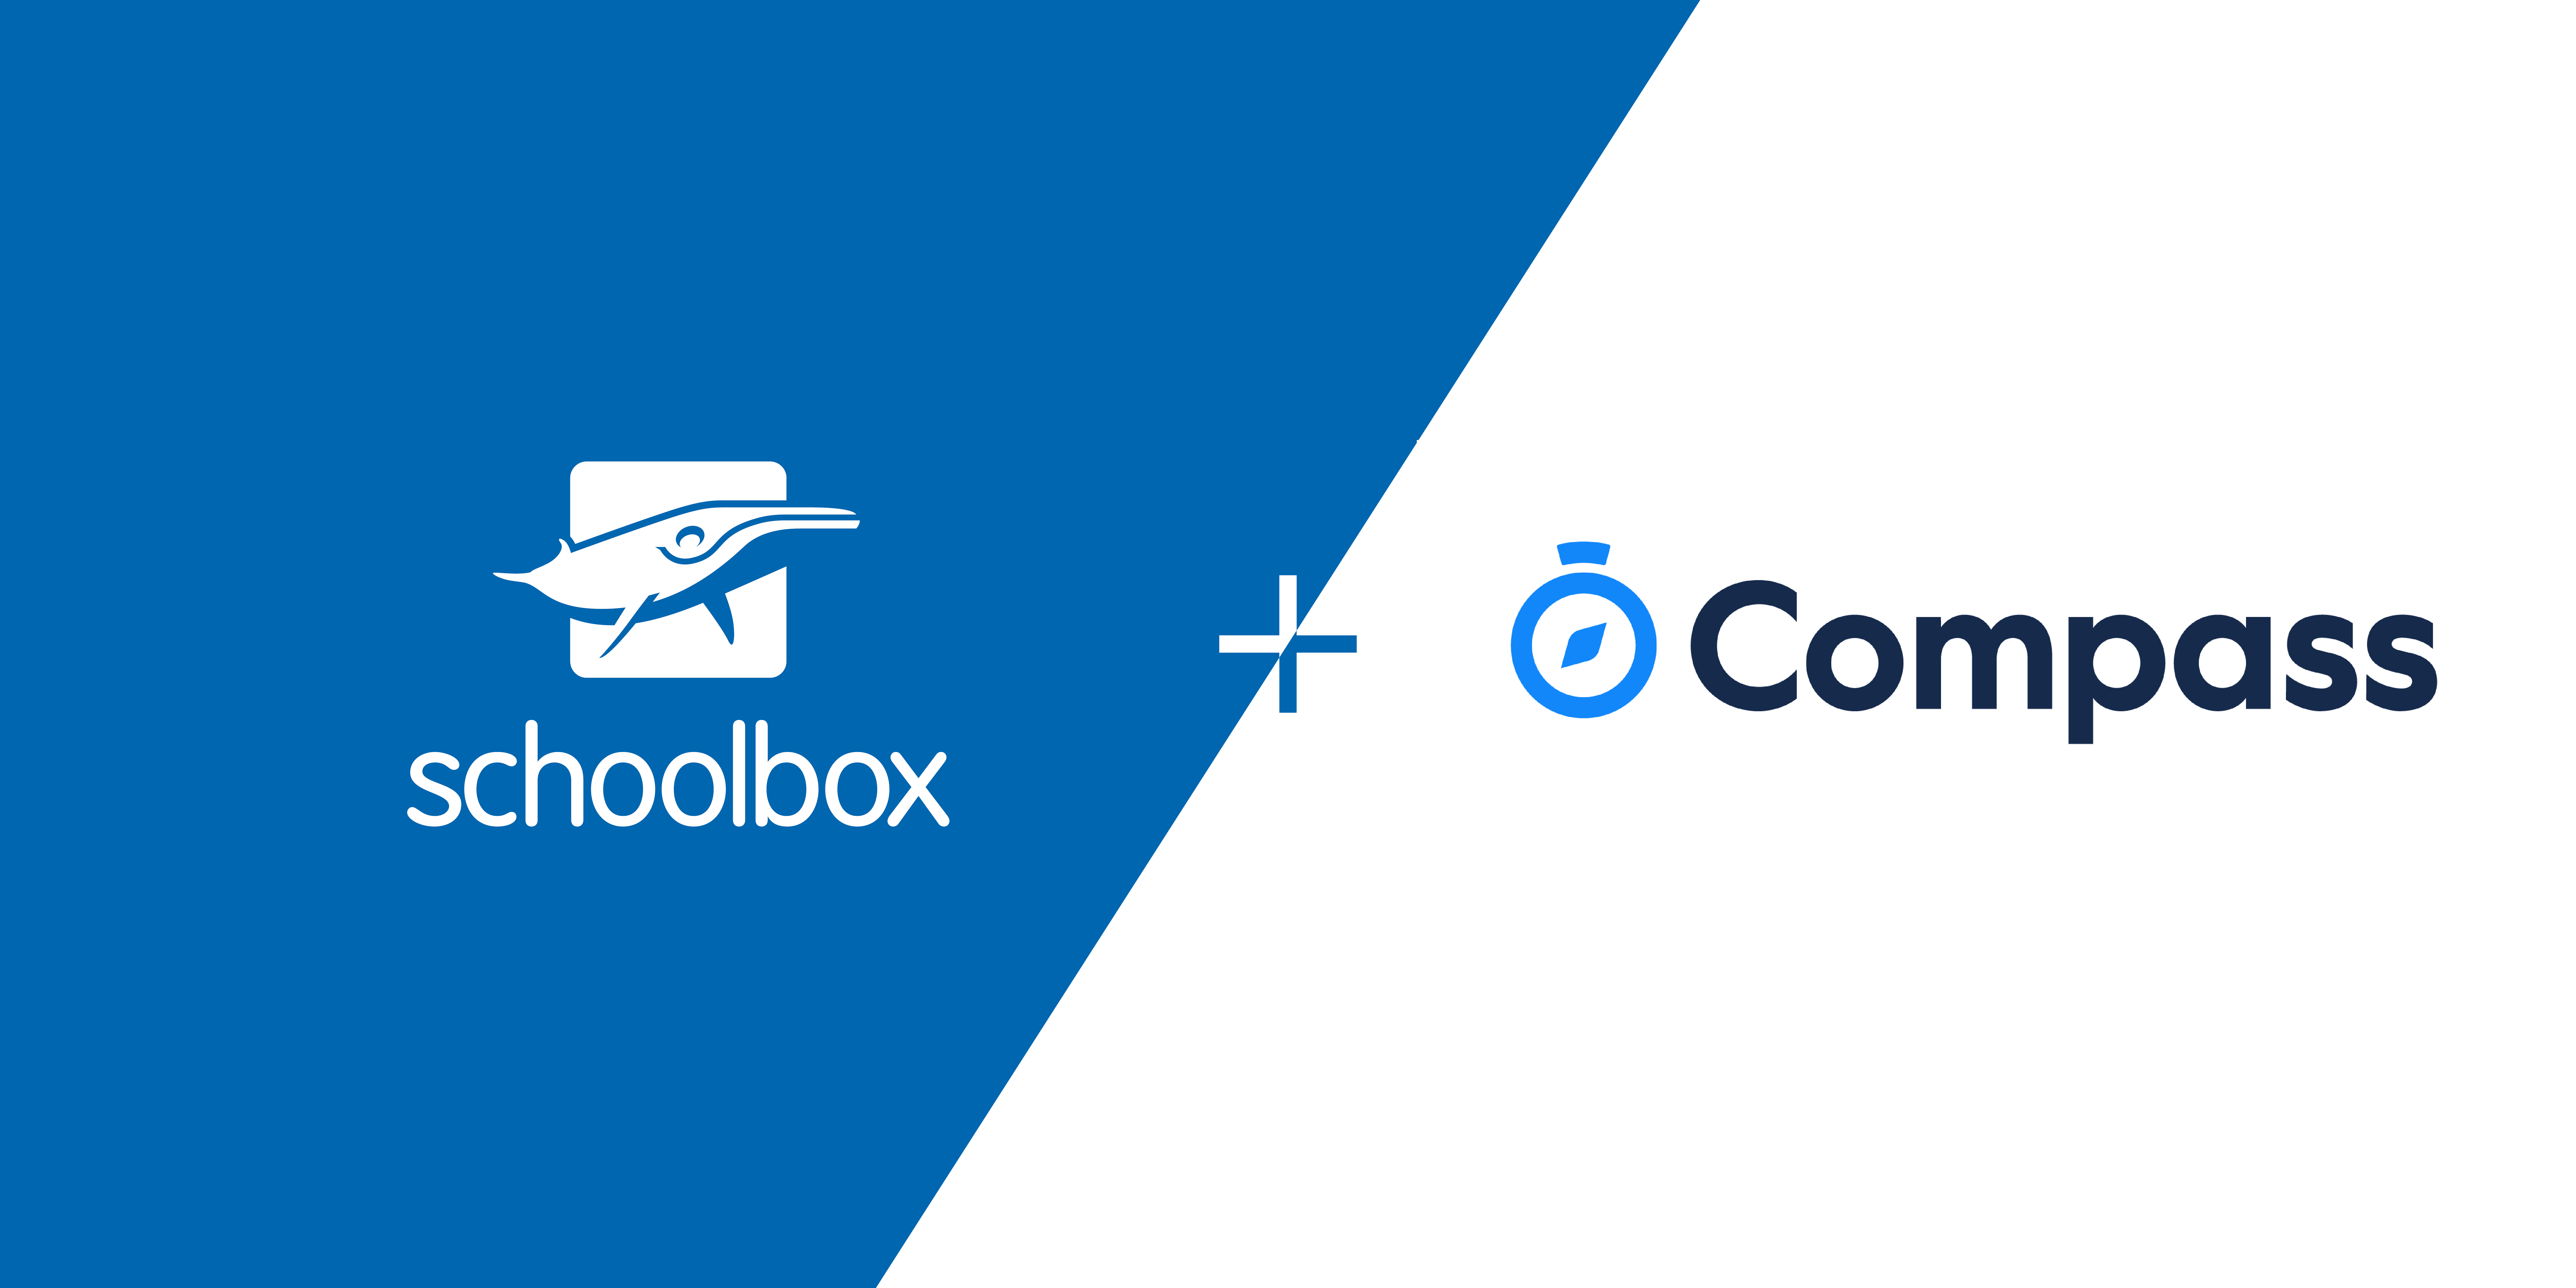 SIS Partner Schoolbox and Compass Comms Design Assets